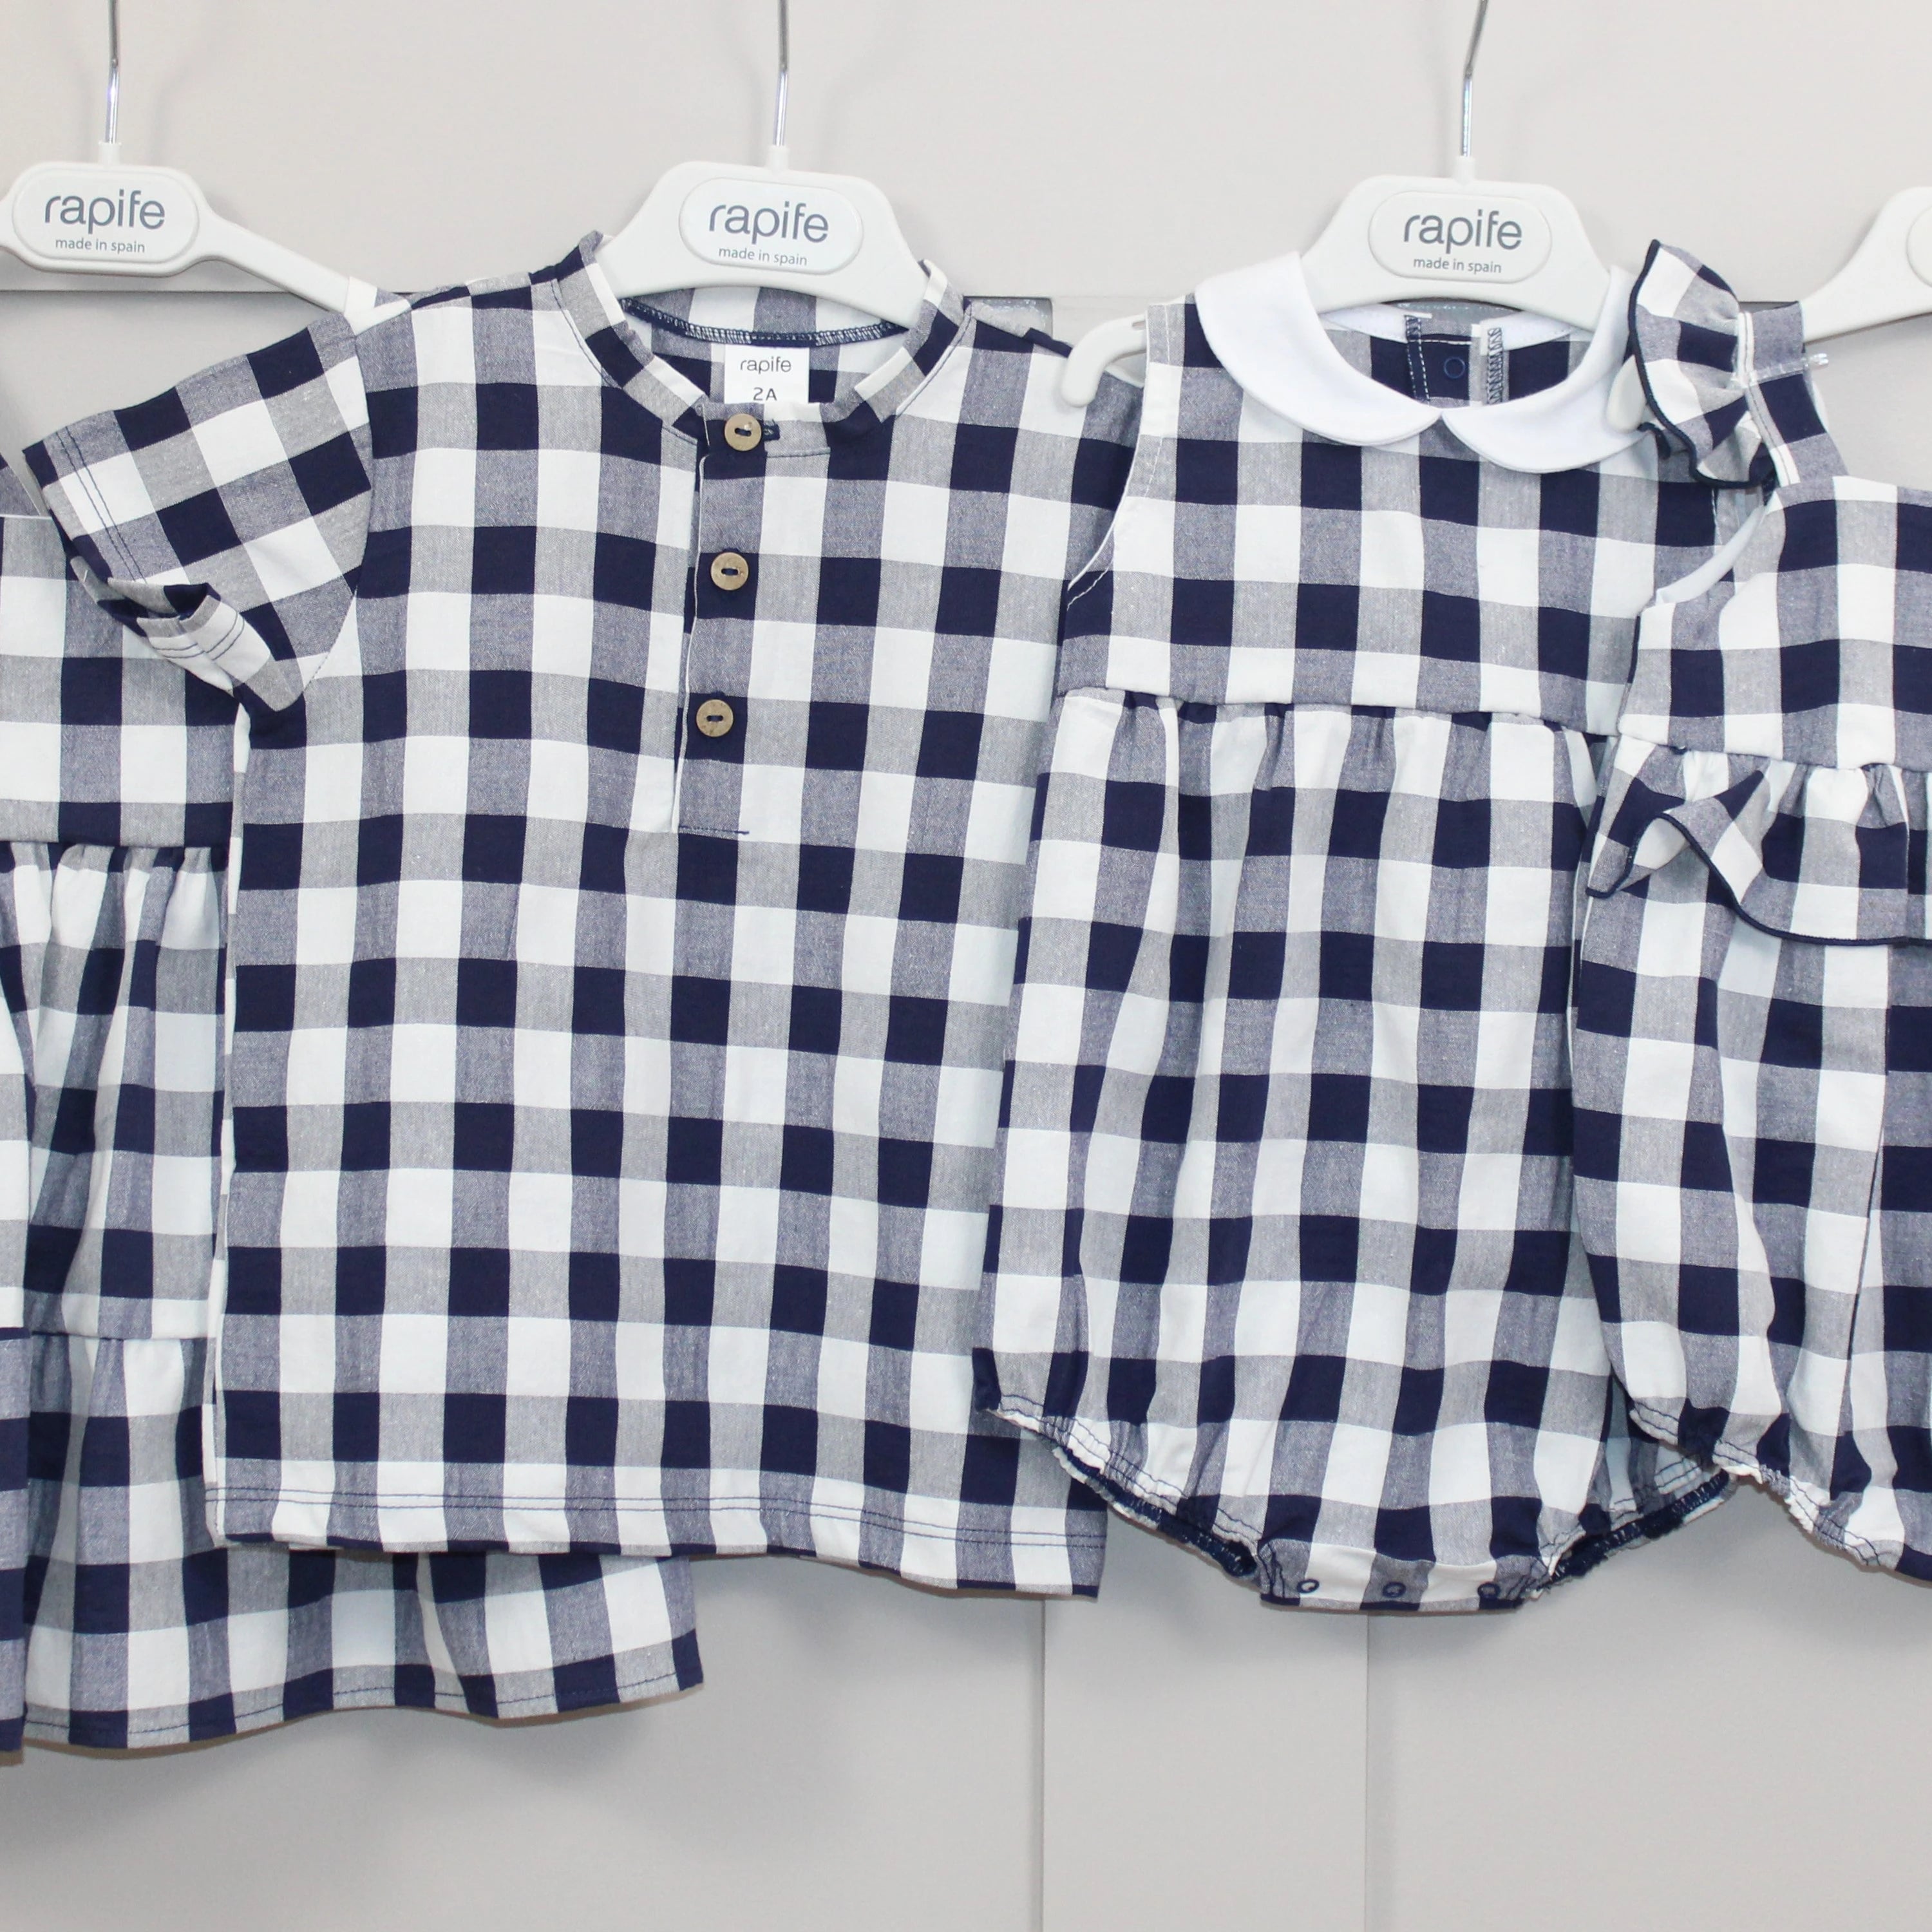 Rapife Navy check summer collection